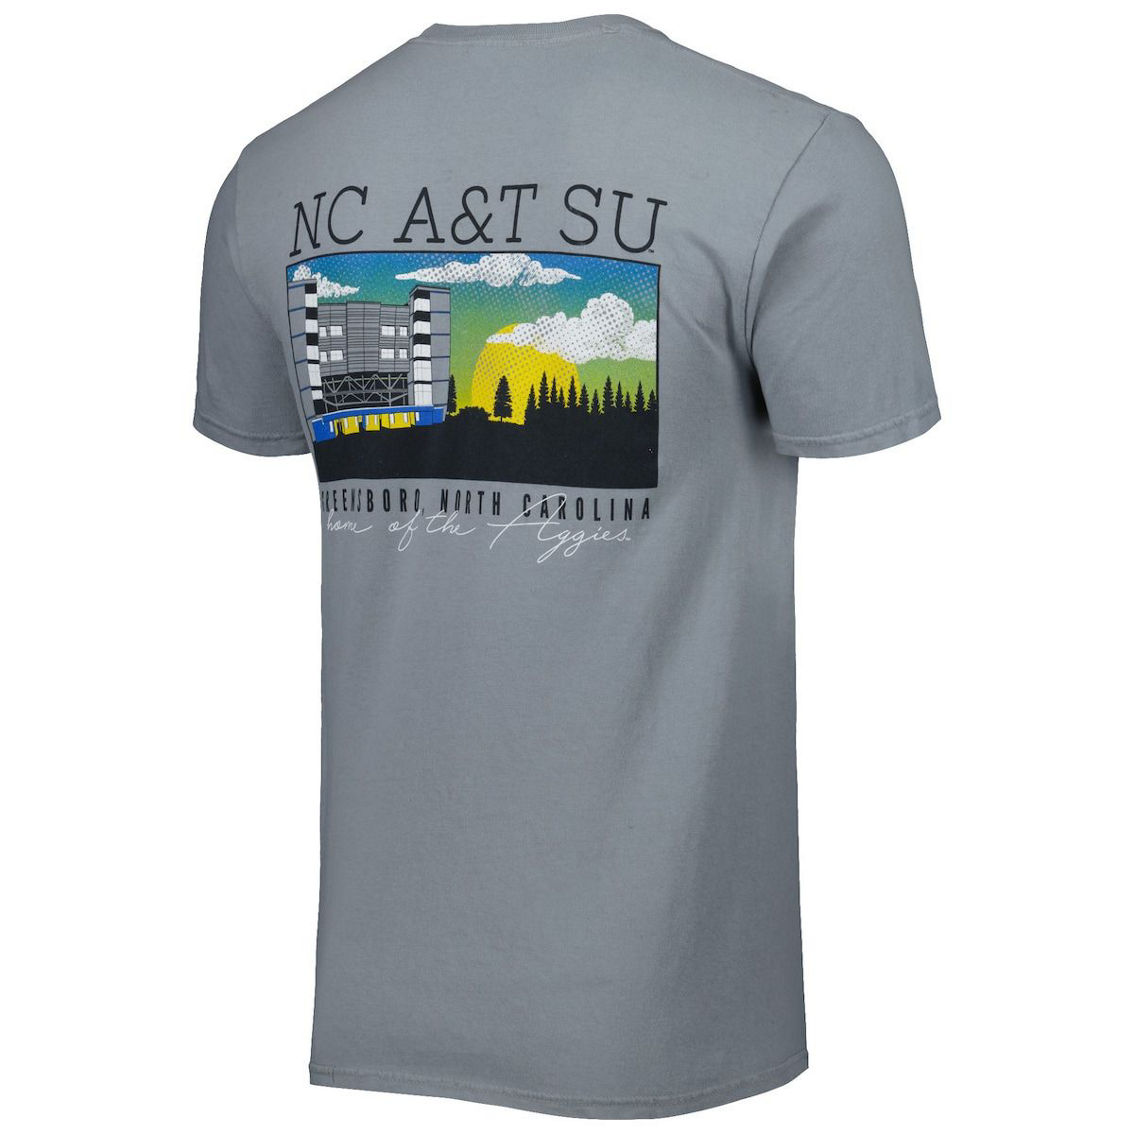 Image One Men's Gray North Carolina A&T Aggies Campus Scenery Comfort Color T-Shirt - Image 4 of 4